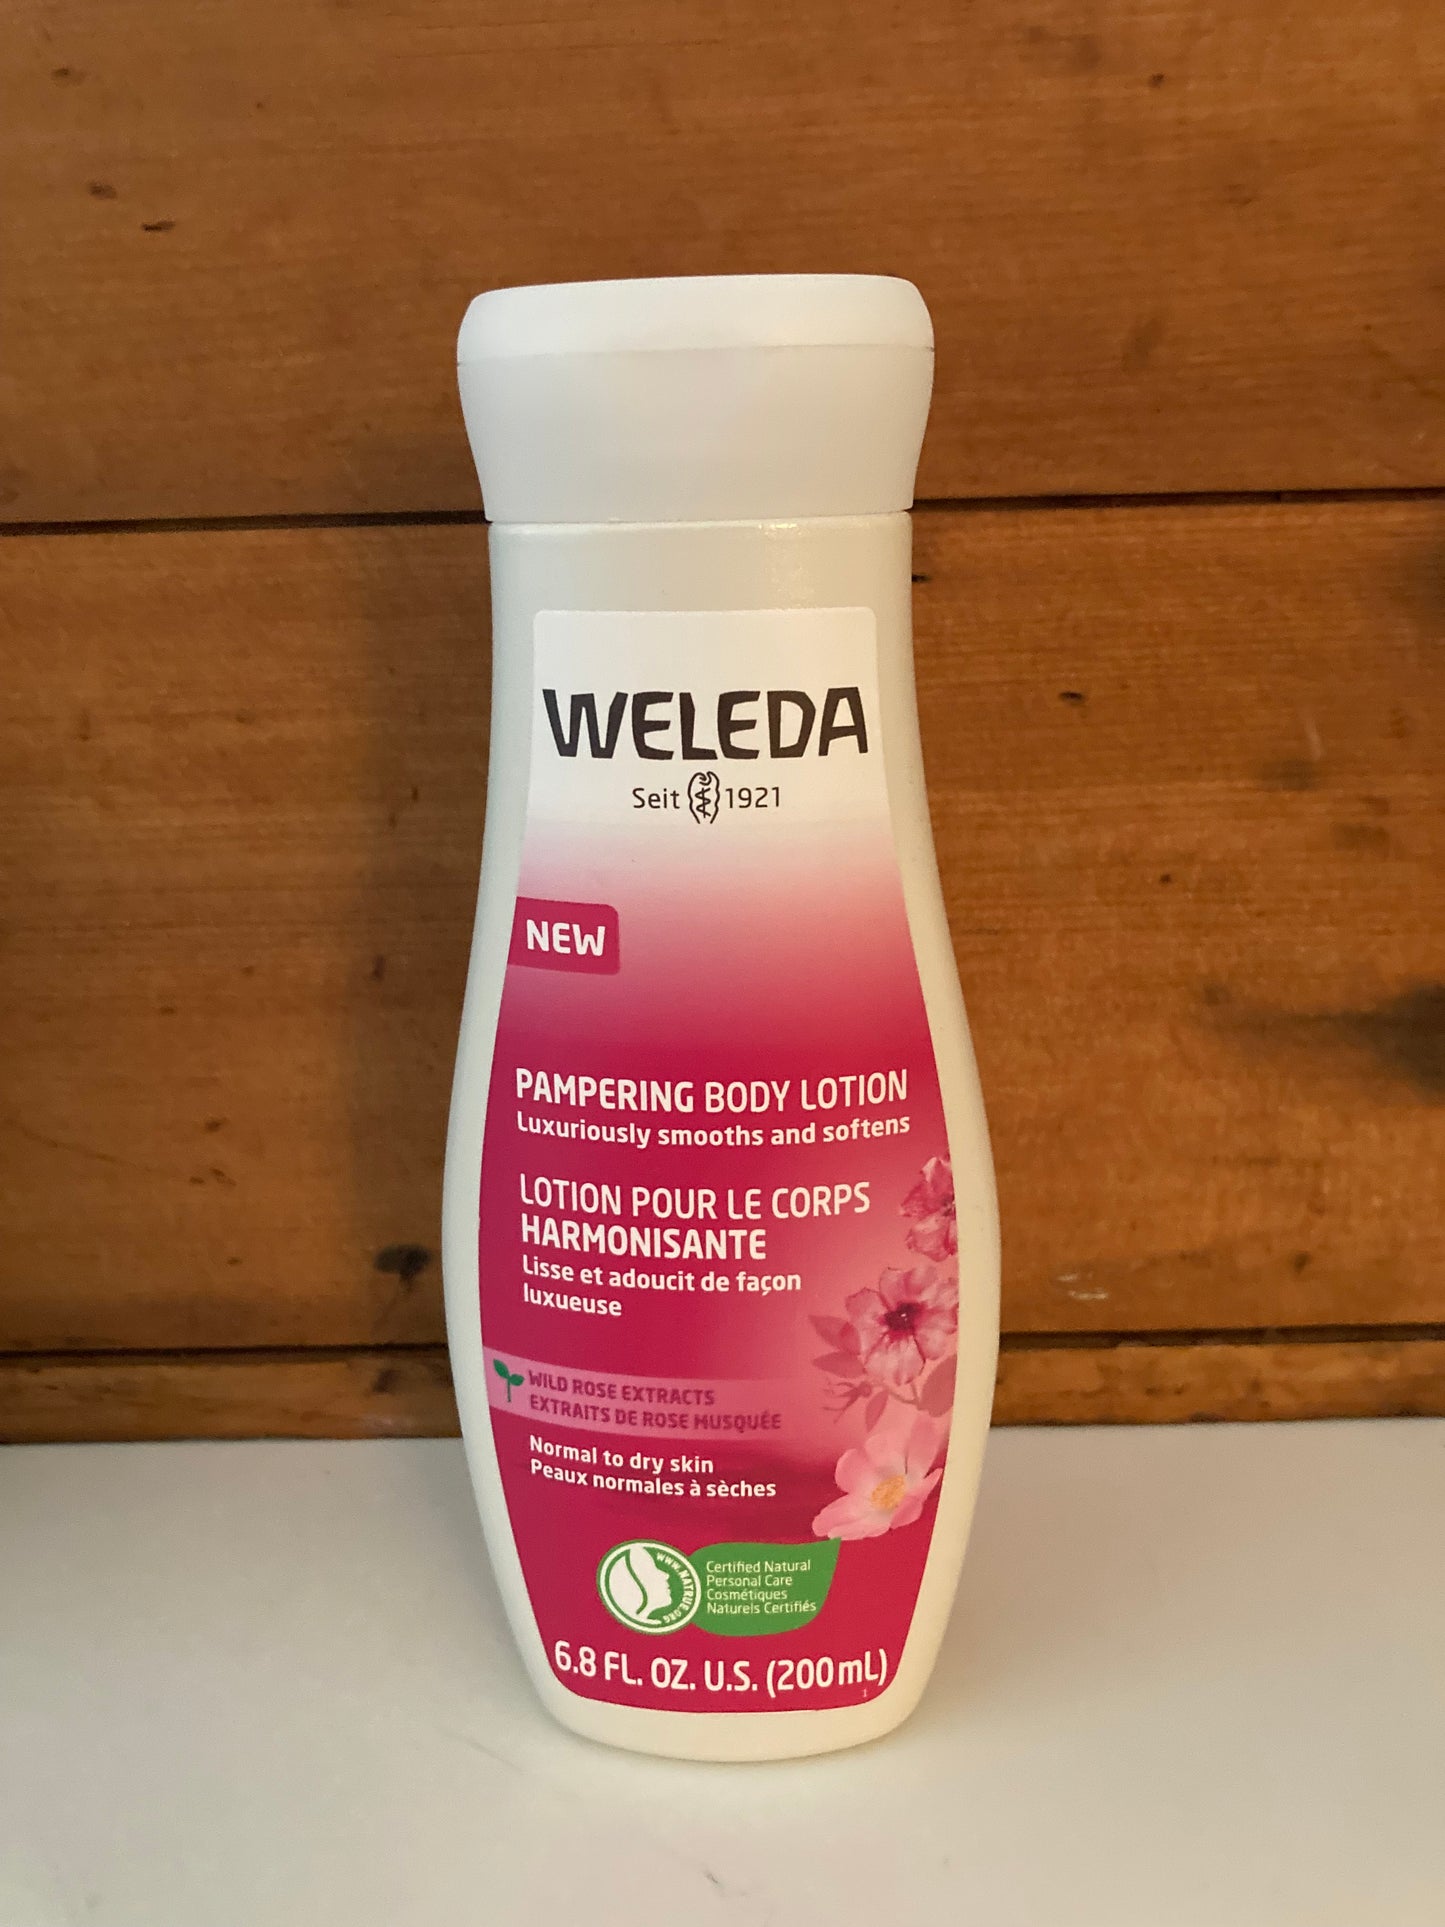 Weleda PAMPERING ROSE BODY LOTION… New!